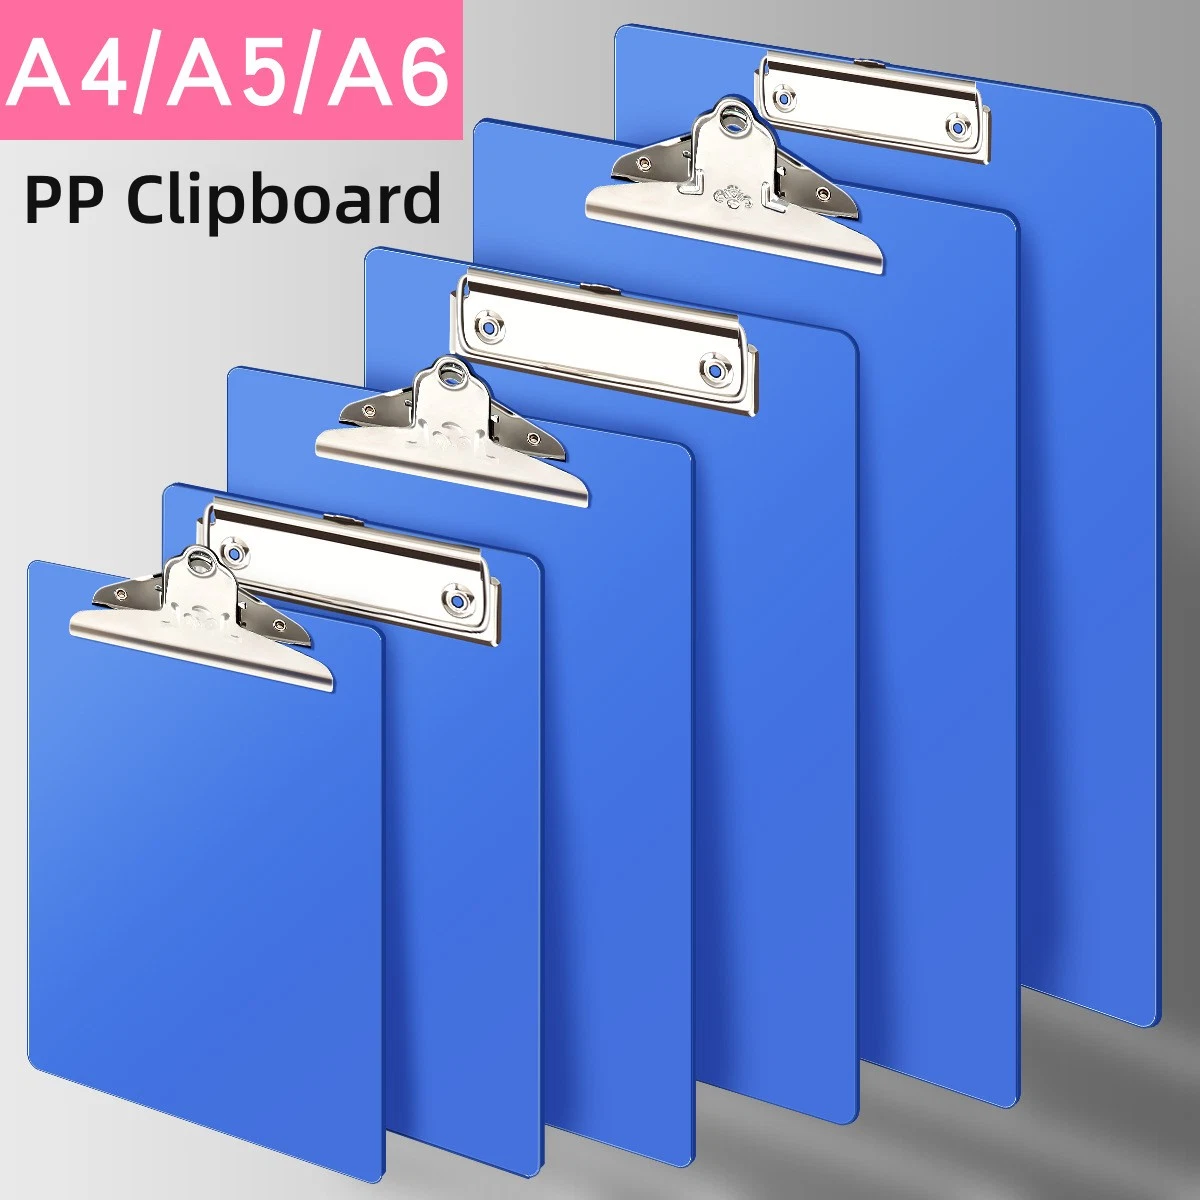 2.0mm Thick PP A4 Size 31.5*22.5cm Clipboard Clip Board with Butterfly Clip for Business, Office, School or Restaurant Stationery